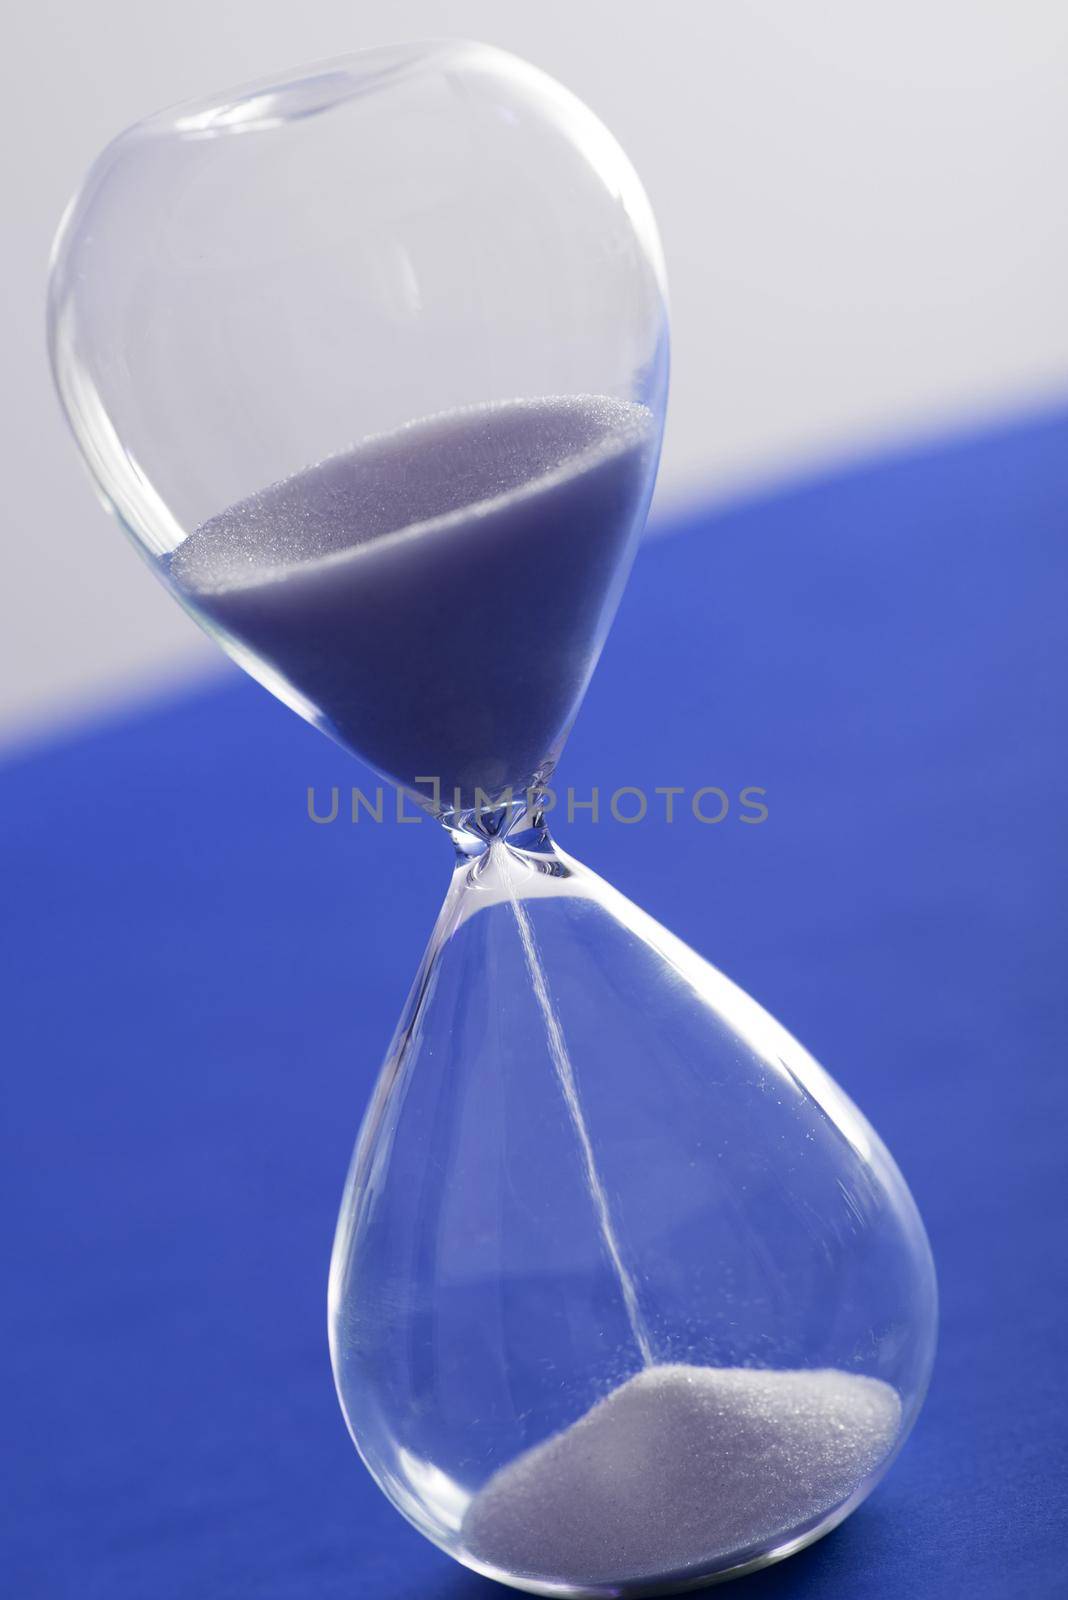 Tilted angle view of sand running through an hourglass over a blue and grey background measuring the passage of time